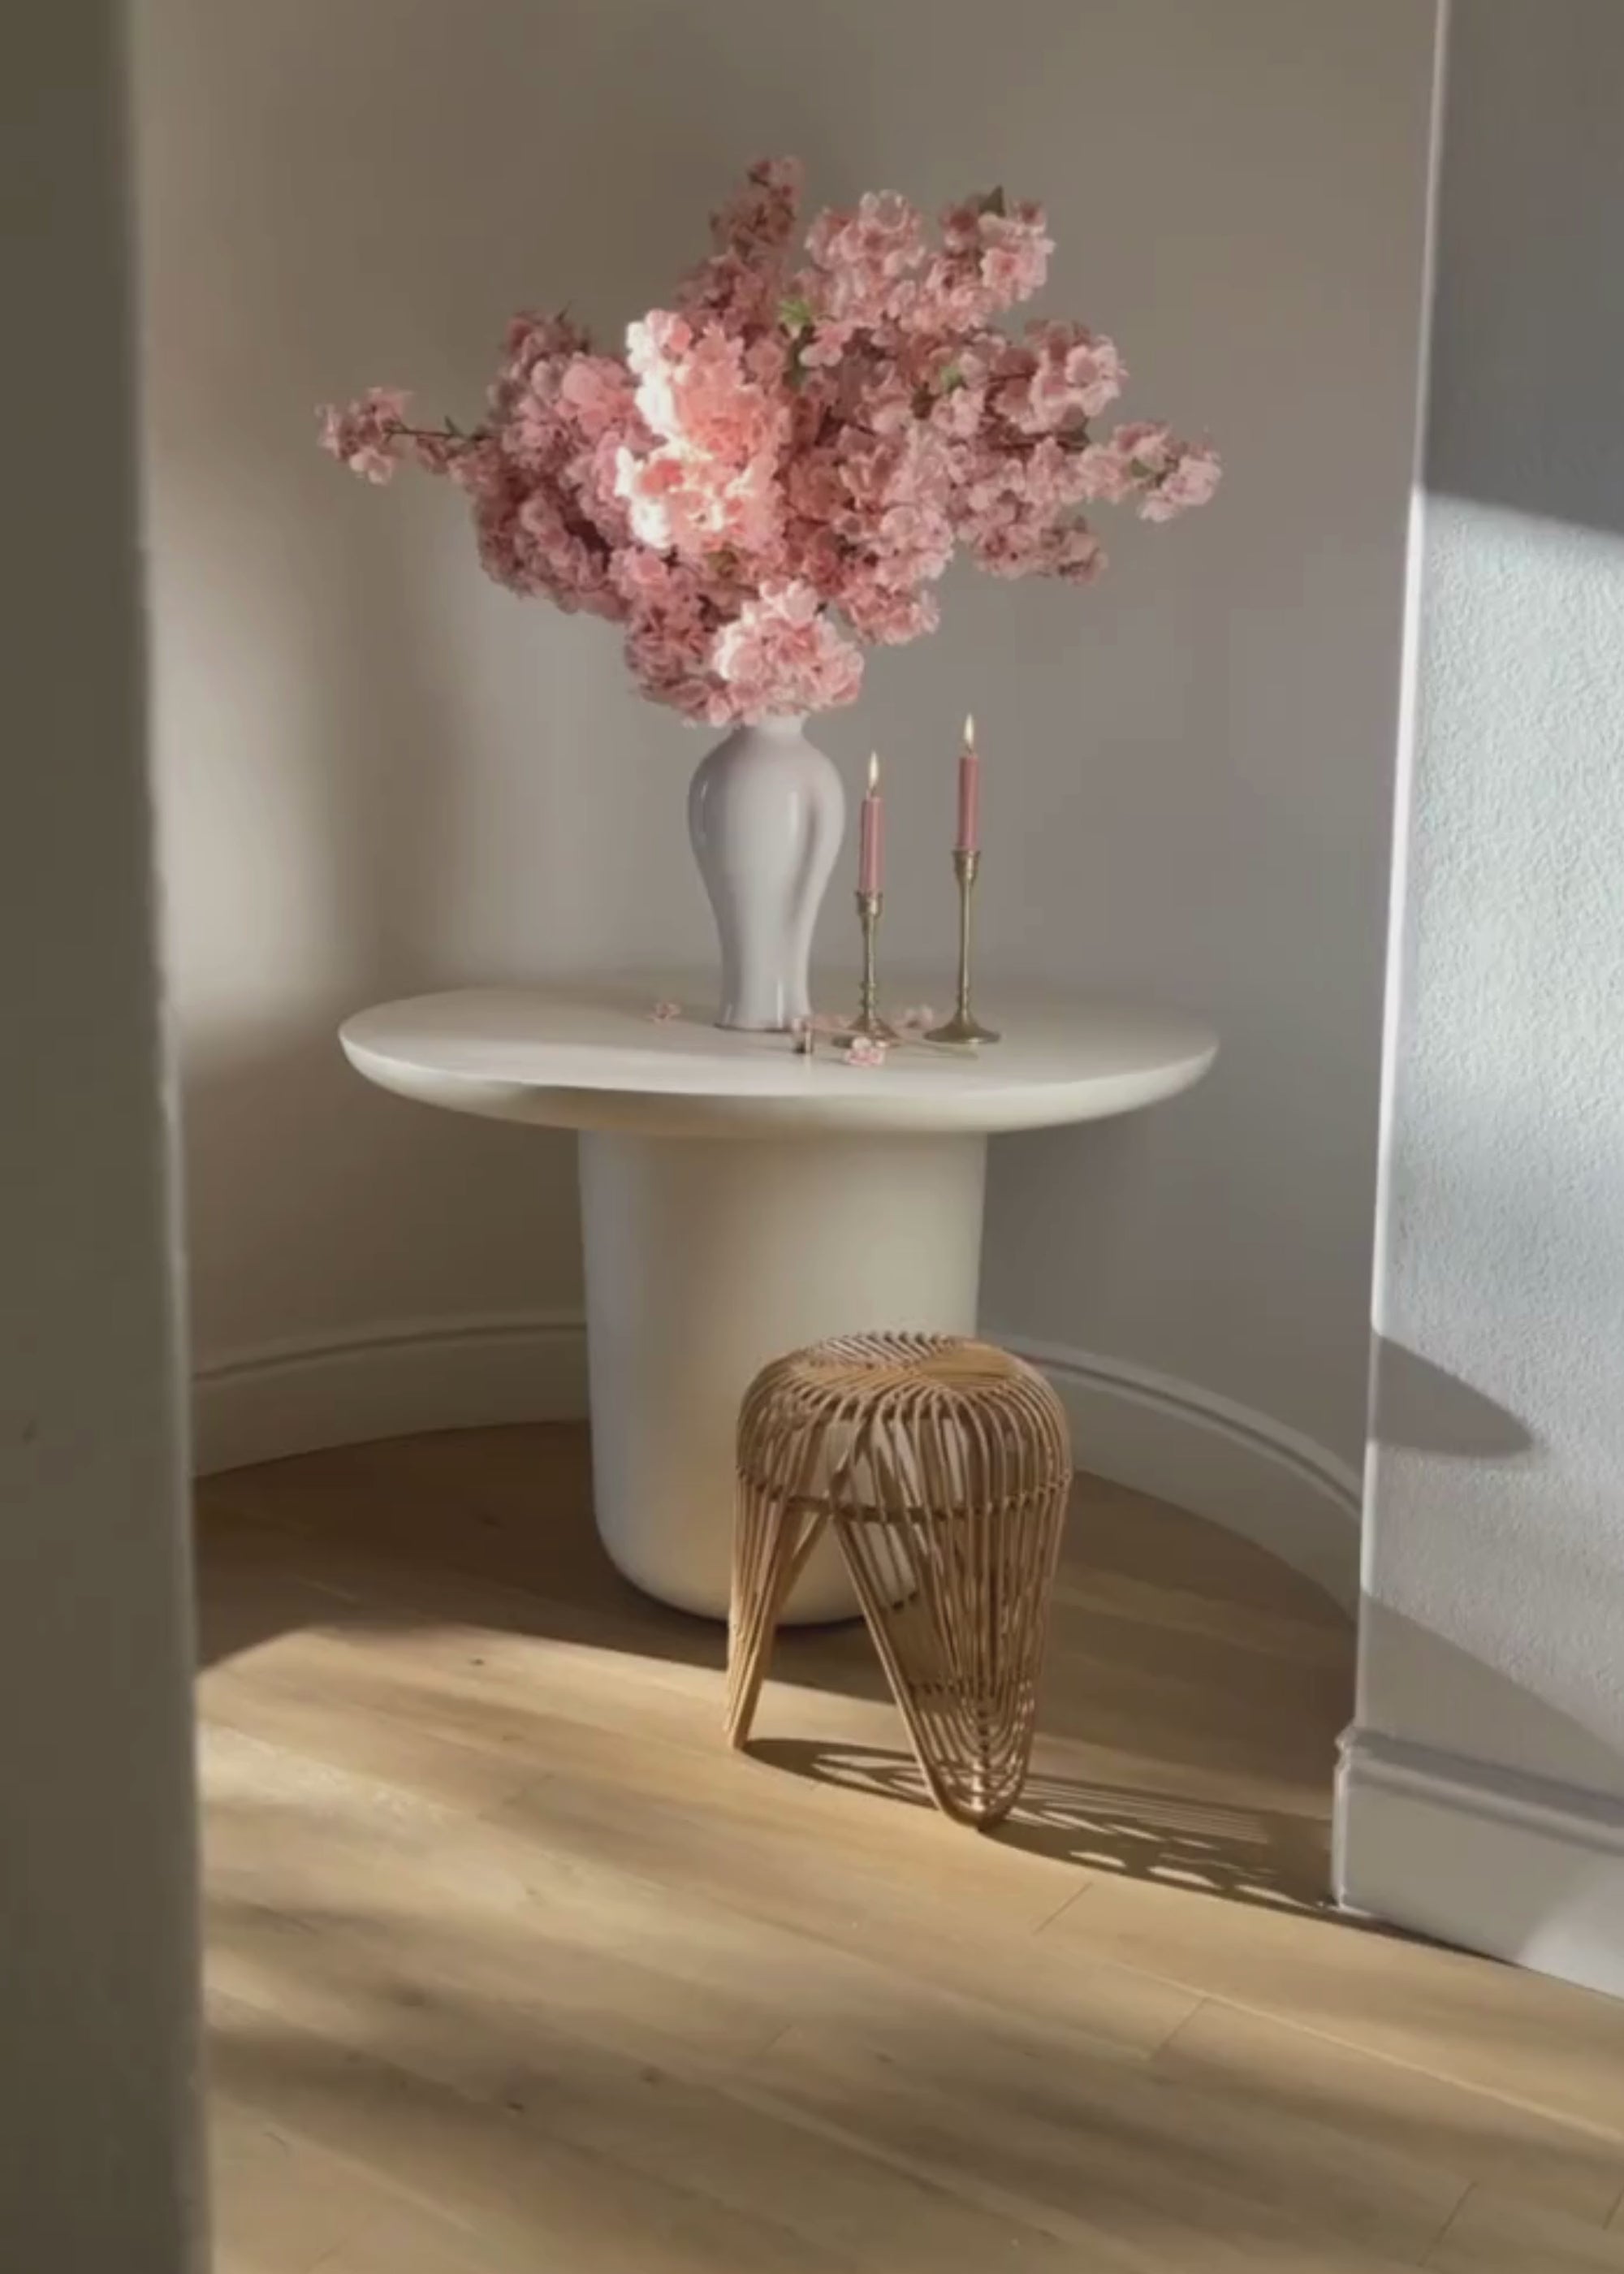 Faux Cherry Blossom Video